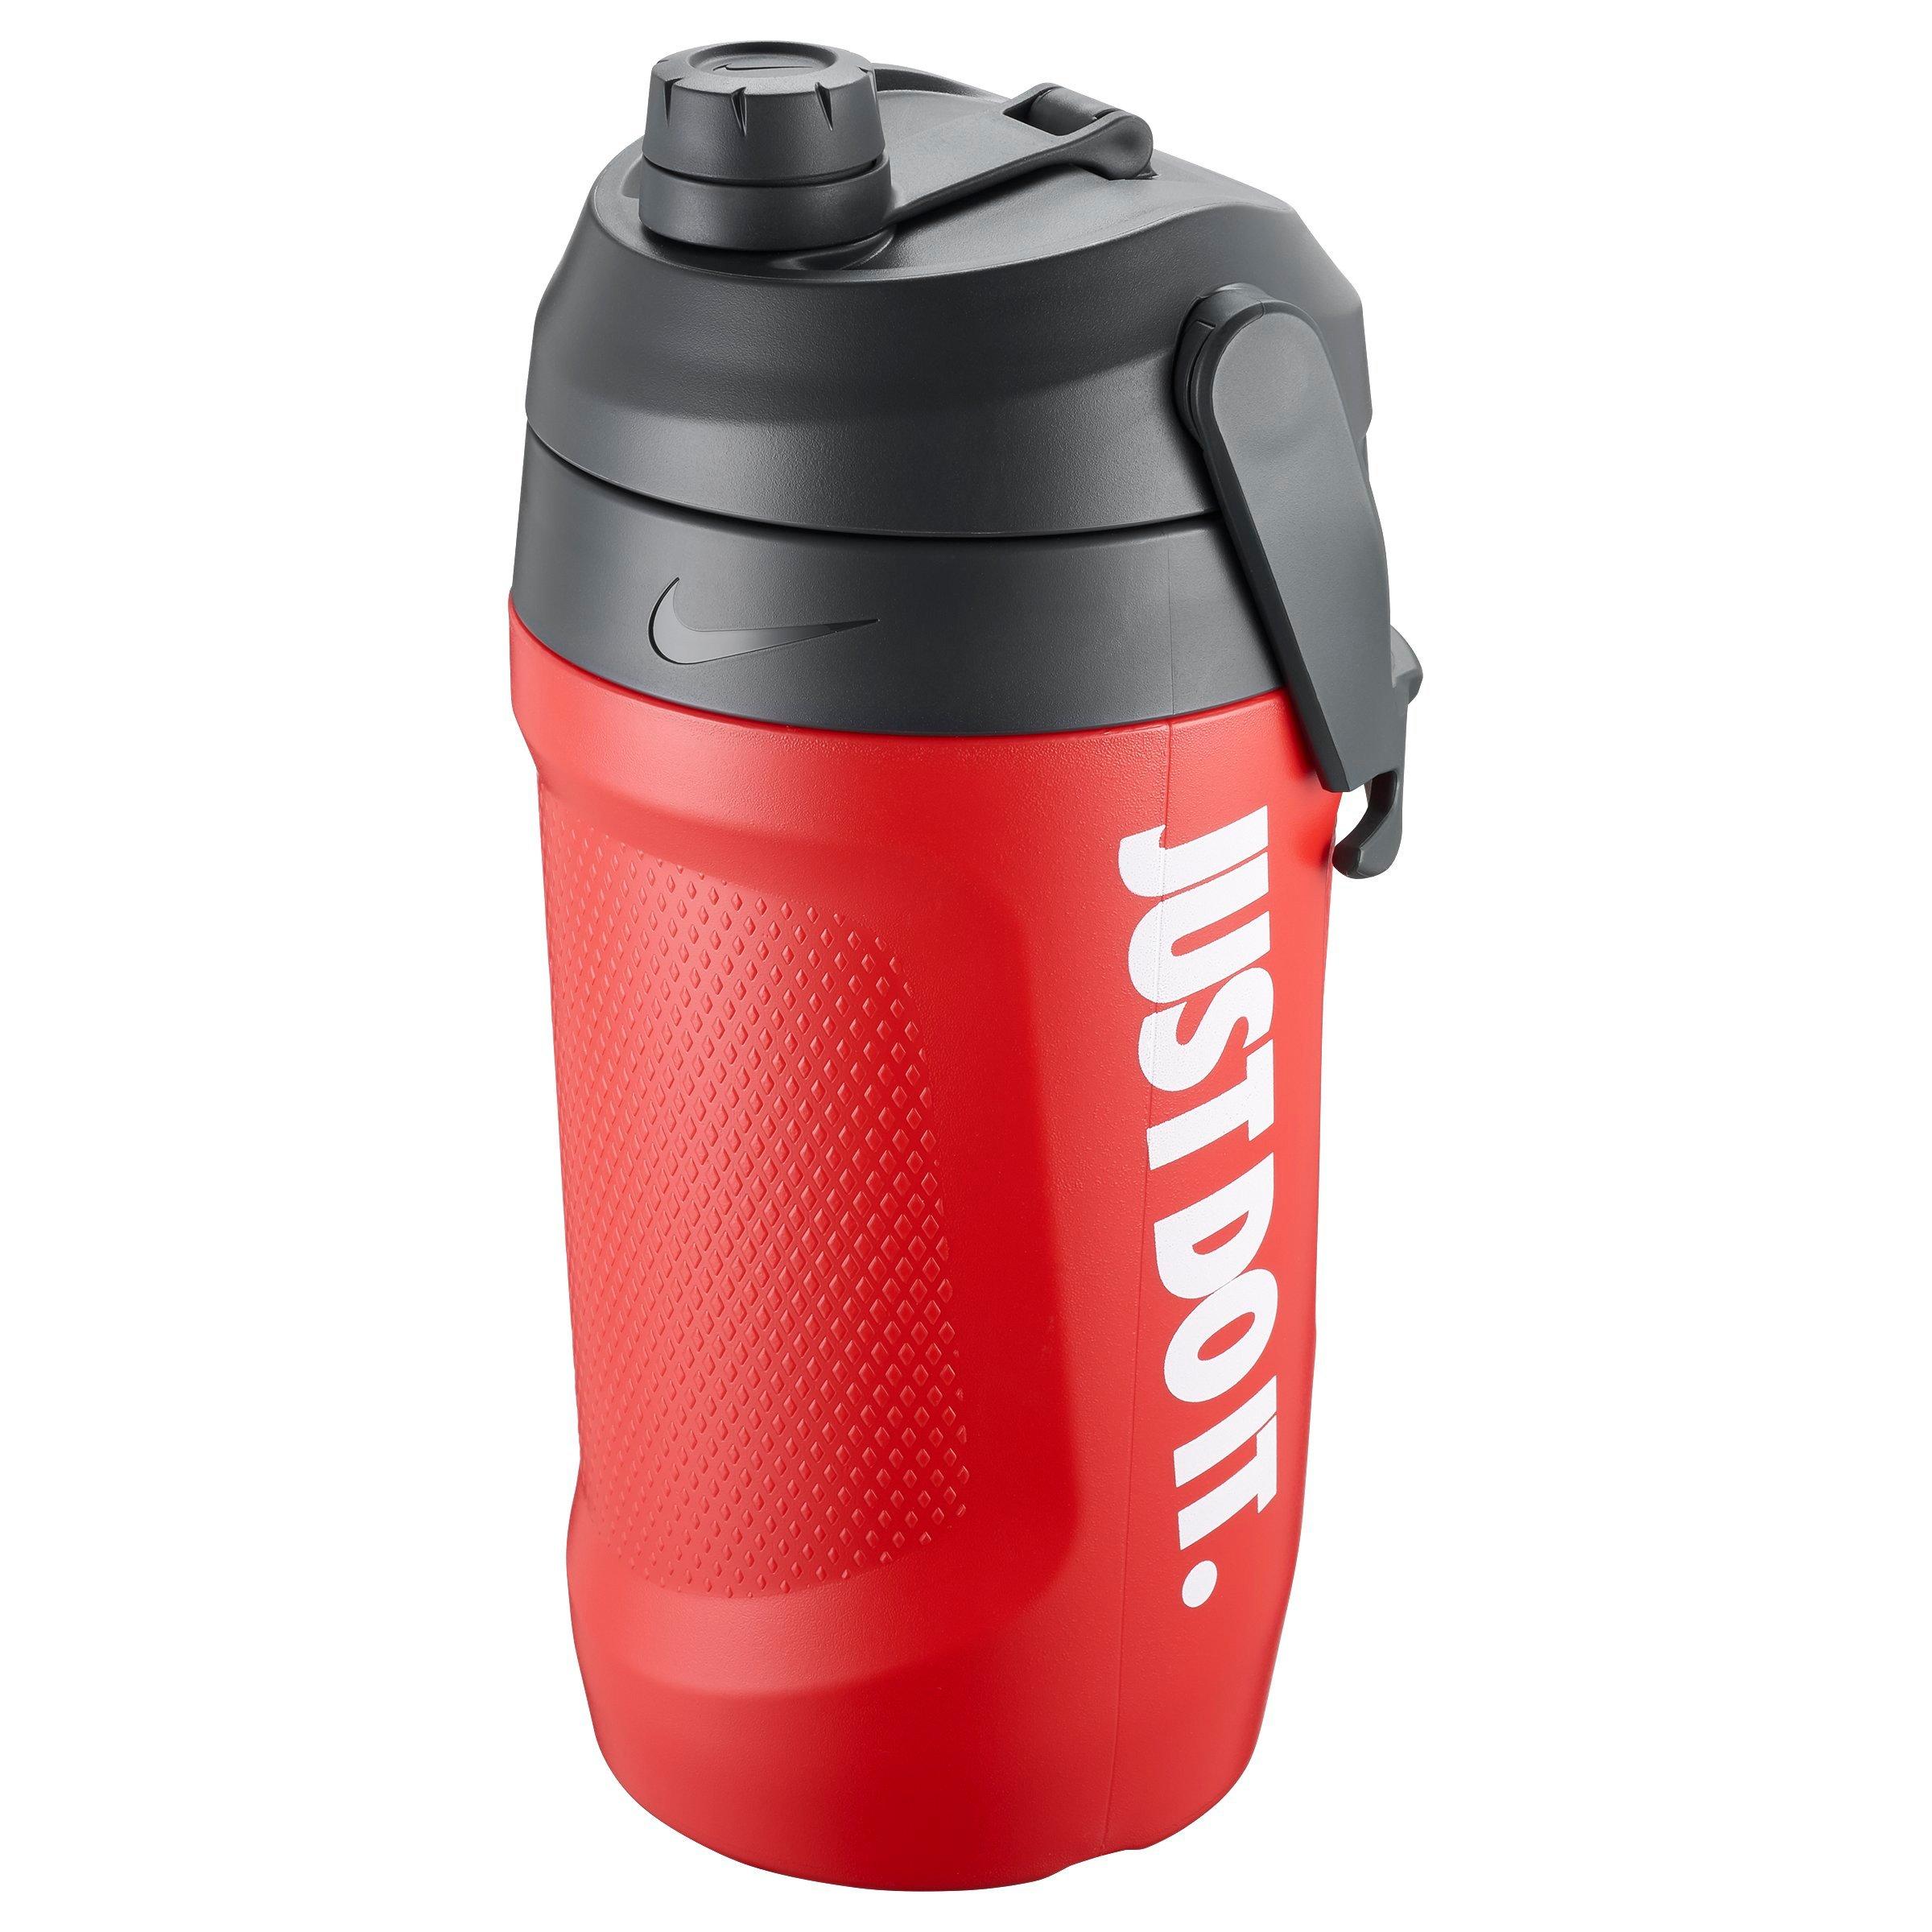 Playmaker Jug Water Bottle (64 oz) from Under Armour